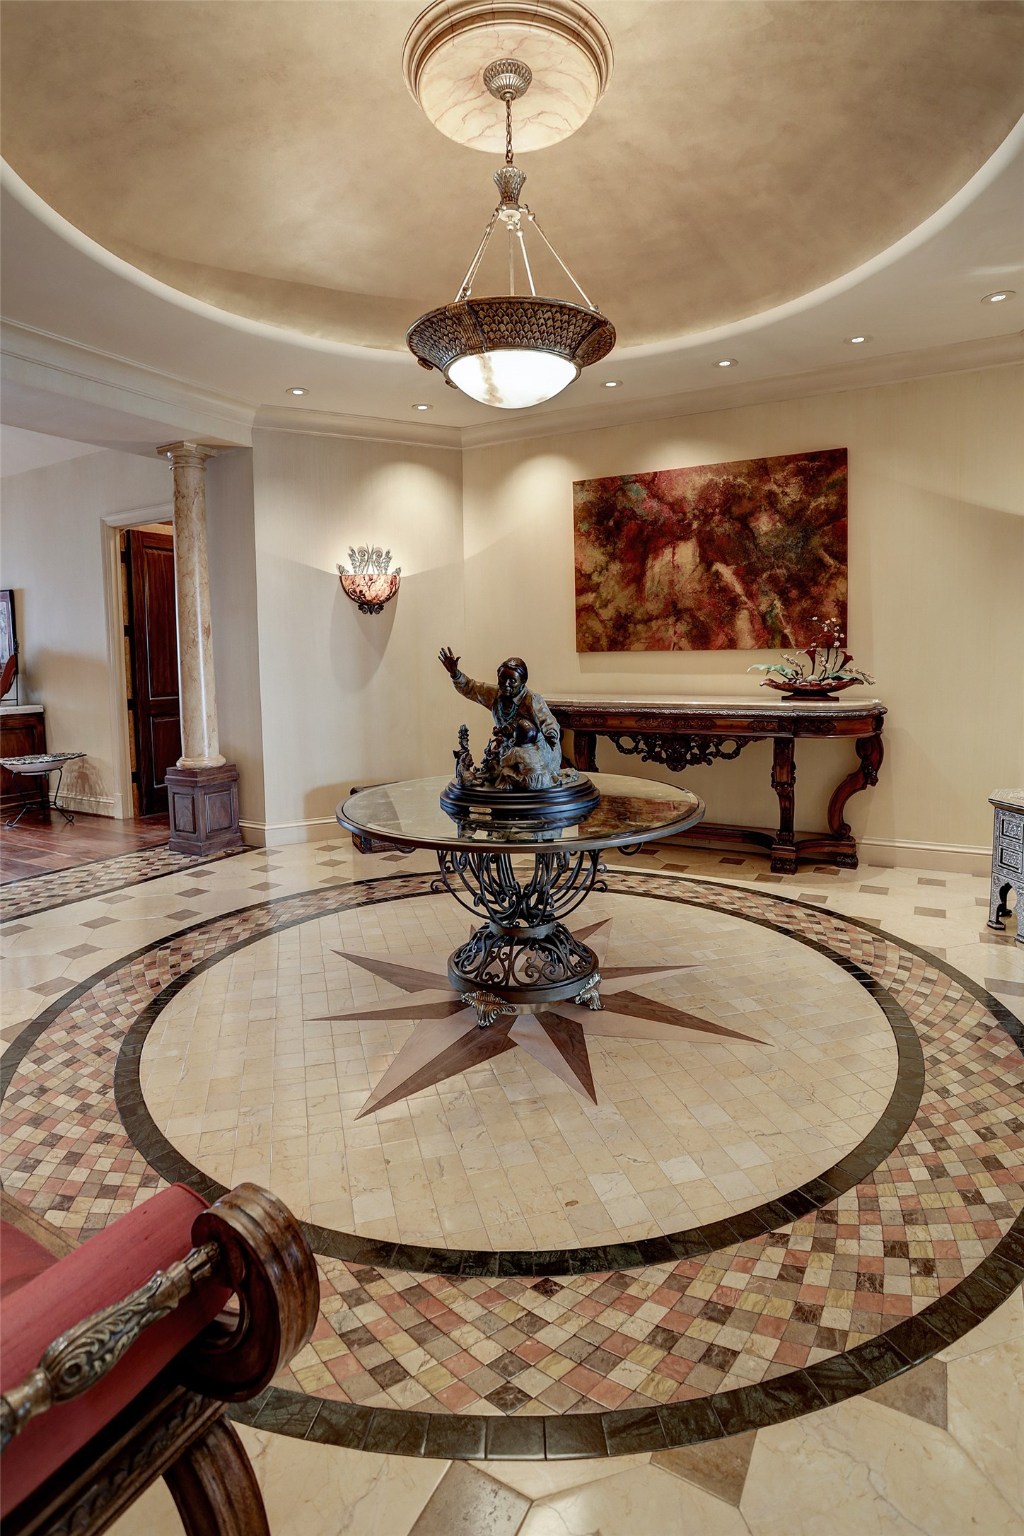 The large Foyer (19 x 23) welcomes guests as they enter from the elevator.  Special features include the mock domed ceiling with faux gilt and faux marble medallion and art lighting.